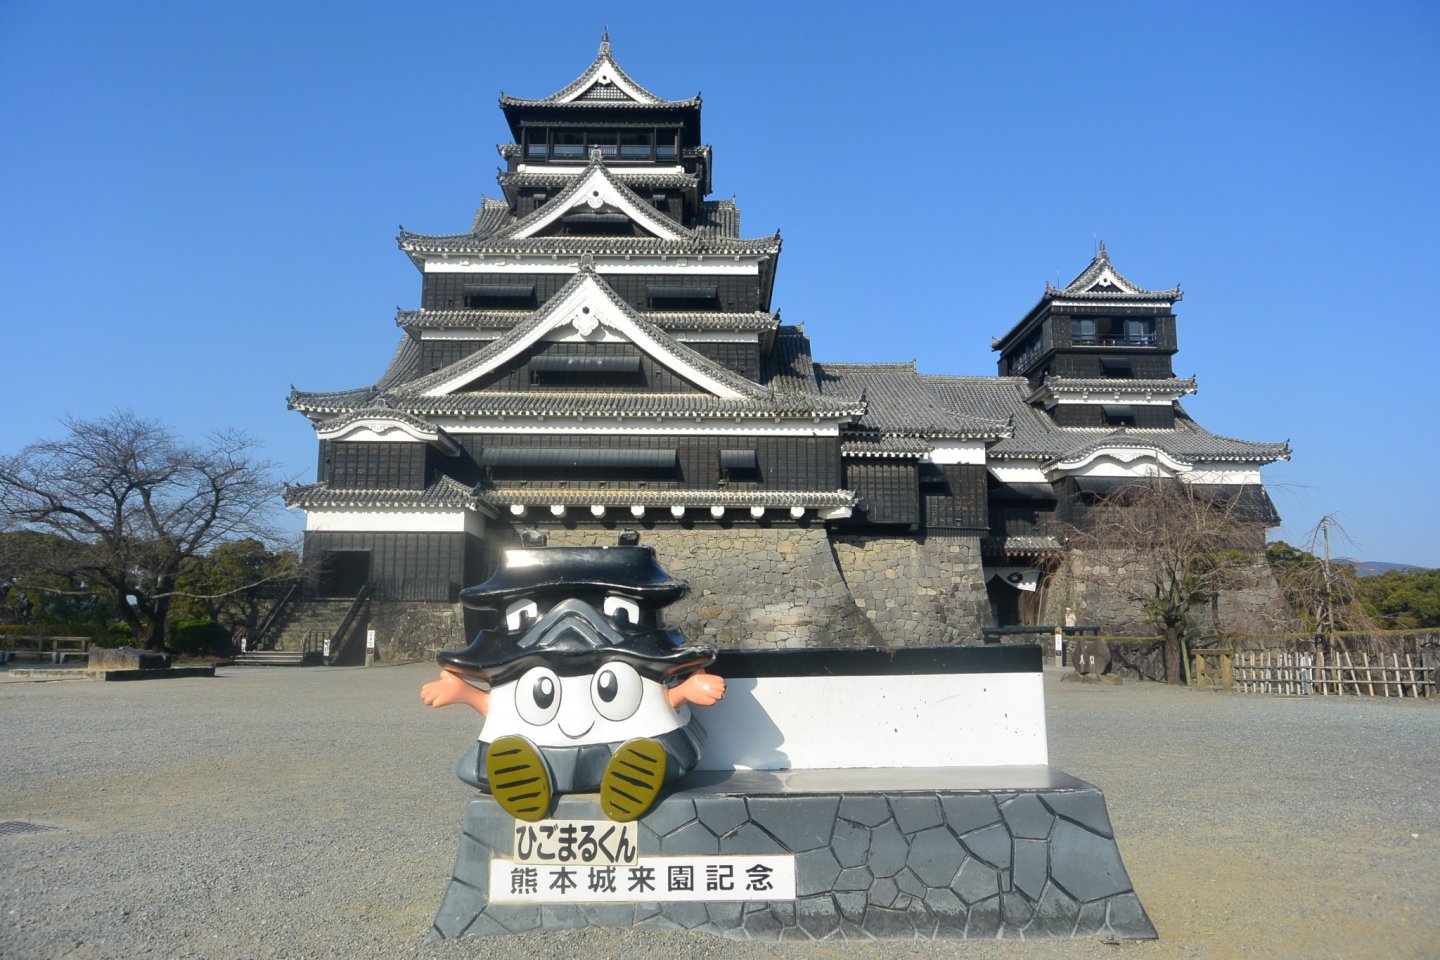 Pose for a photo with Kumamoto Castle as the background.